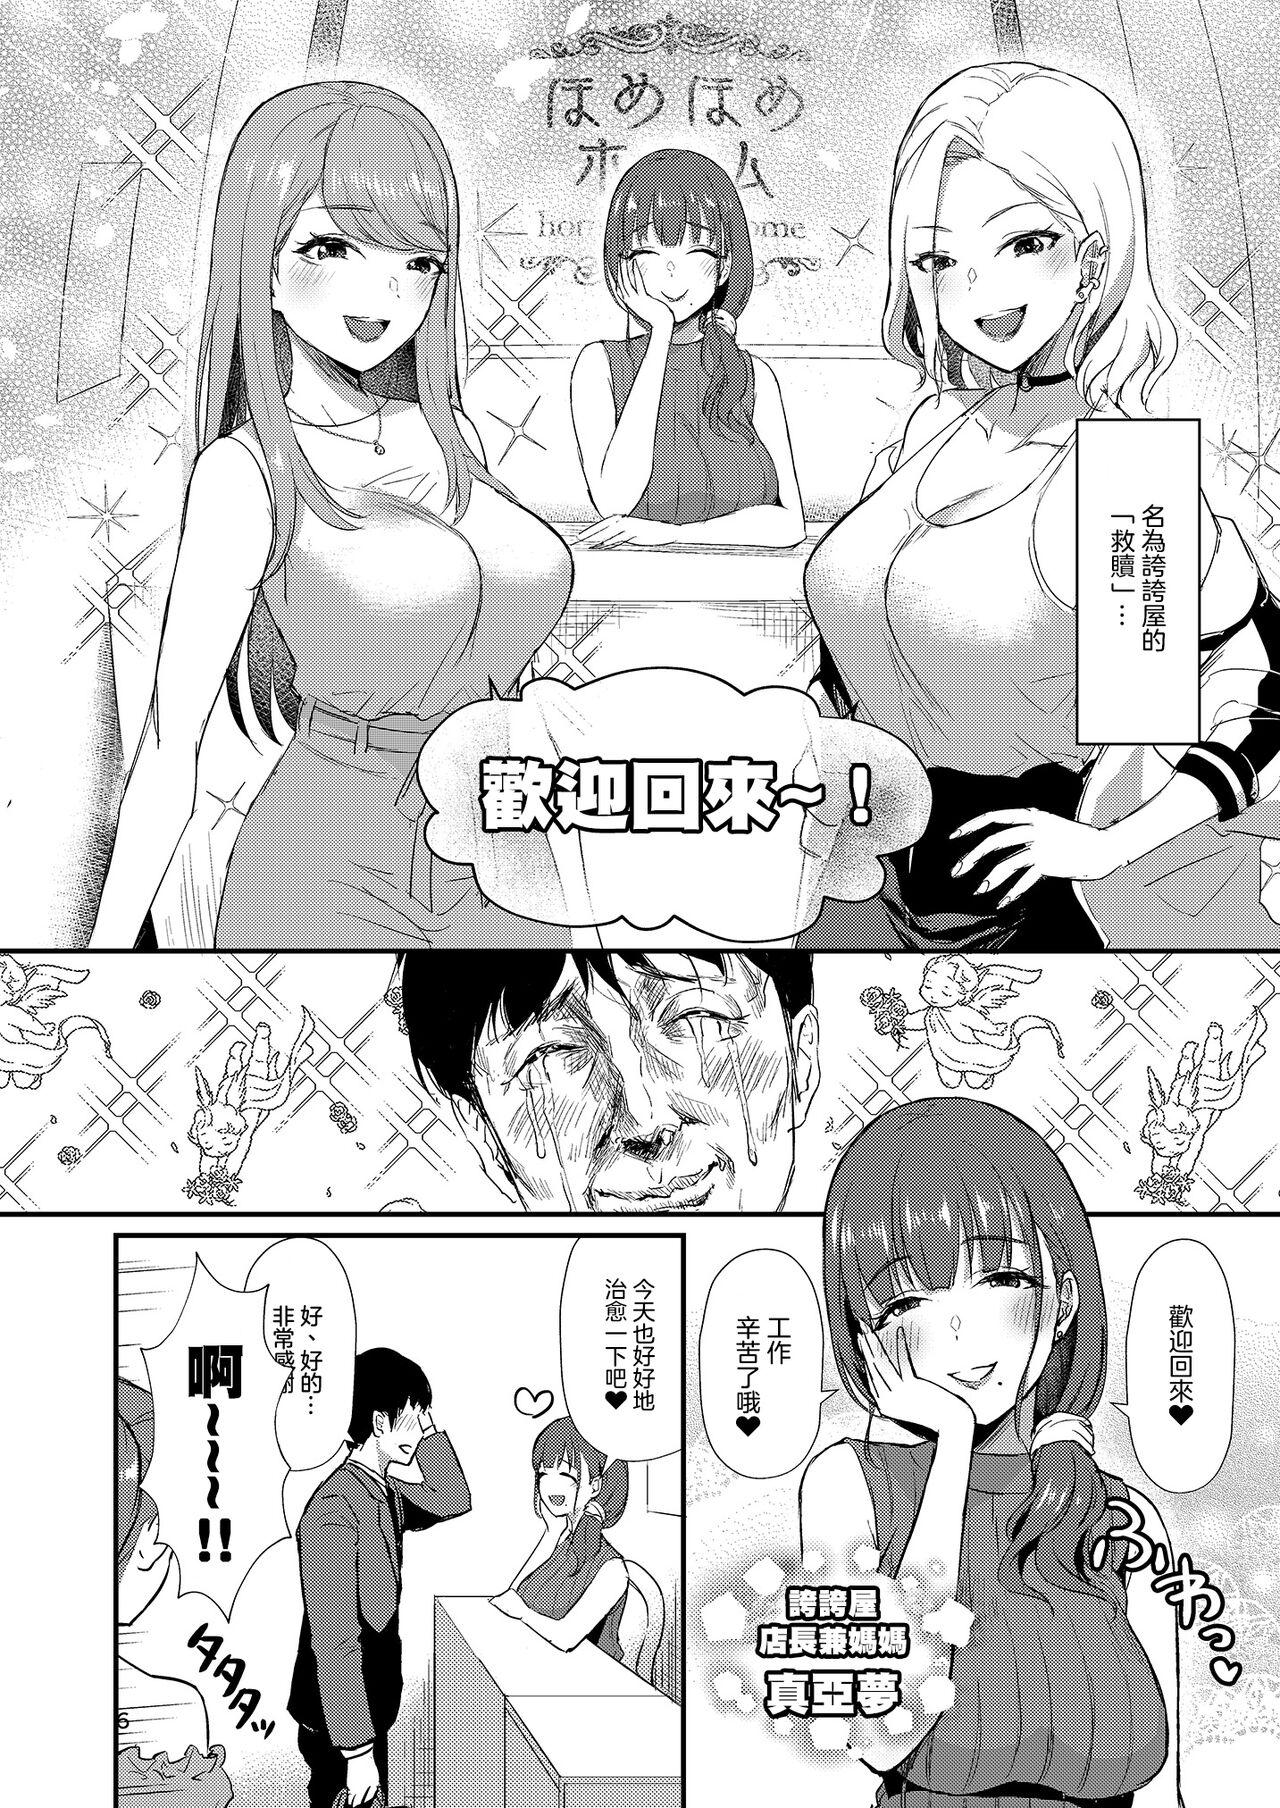 Outdoors Homehome Home e Youkoso! - Welcome to Home Home Home! | 歡迎來到誇誇屋！ Hardcore Porn Free - Page 7